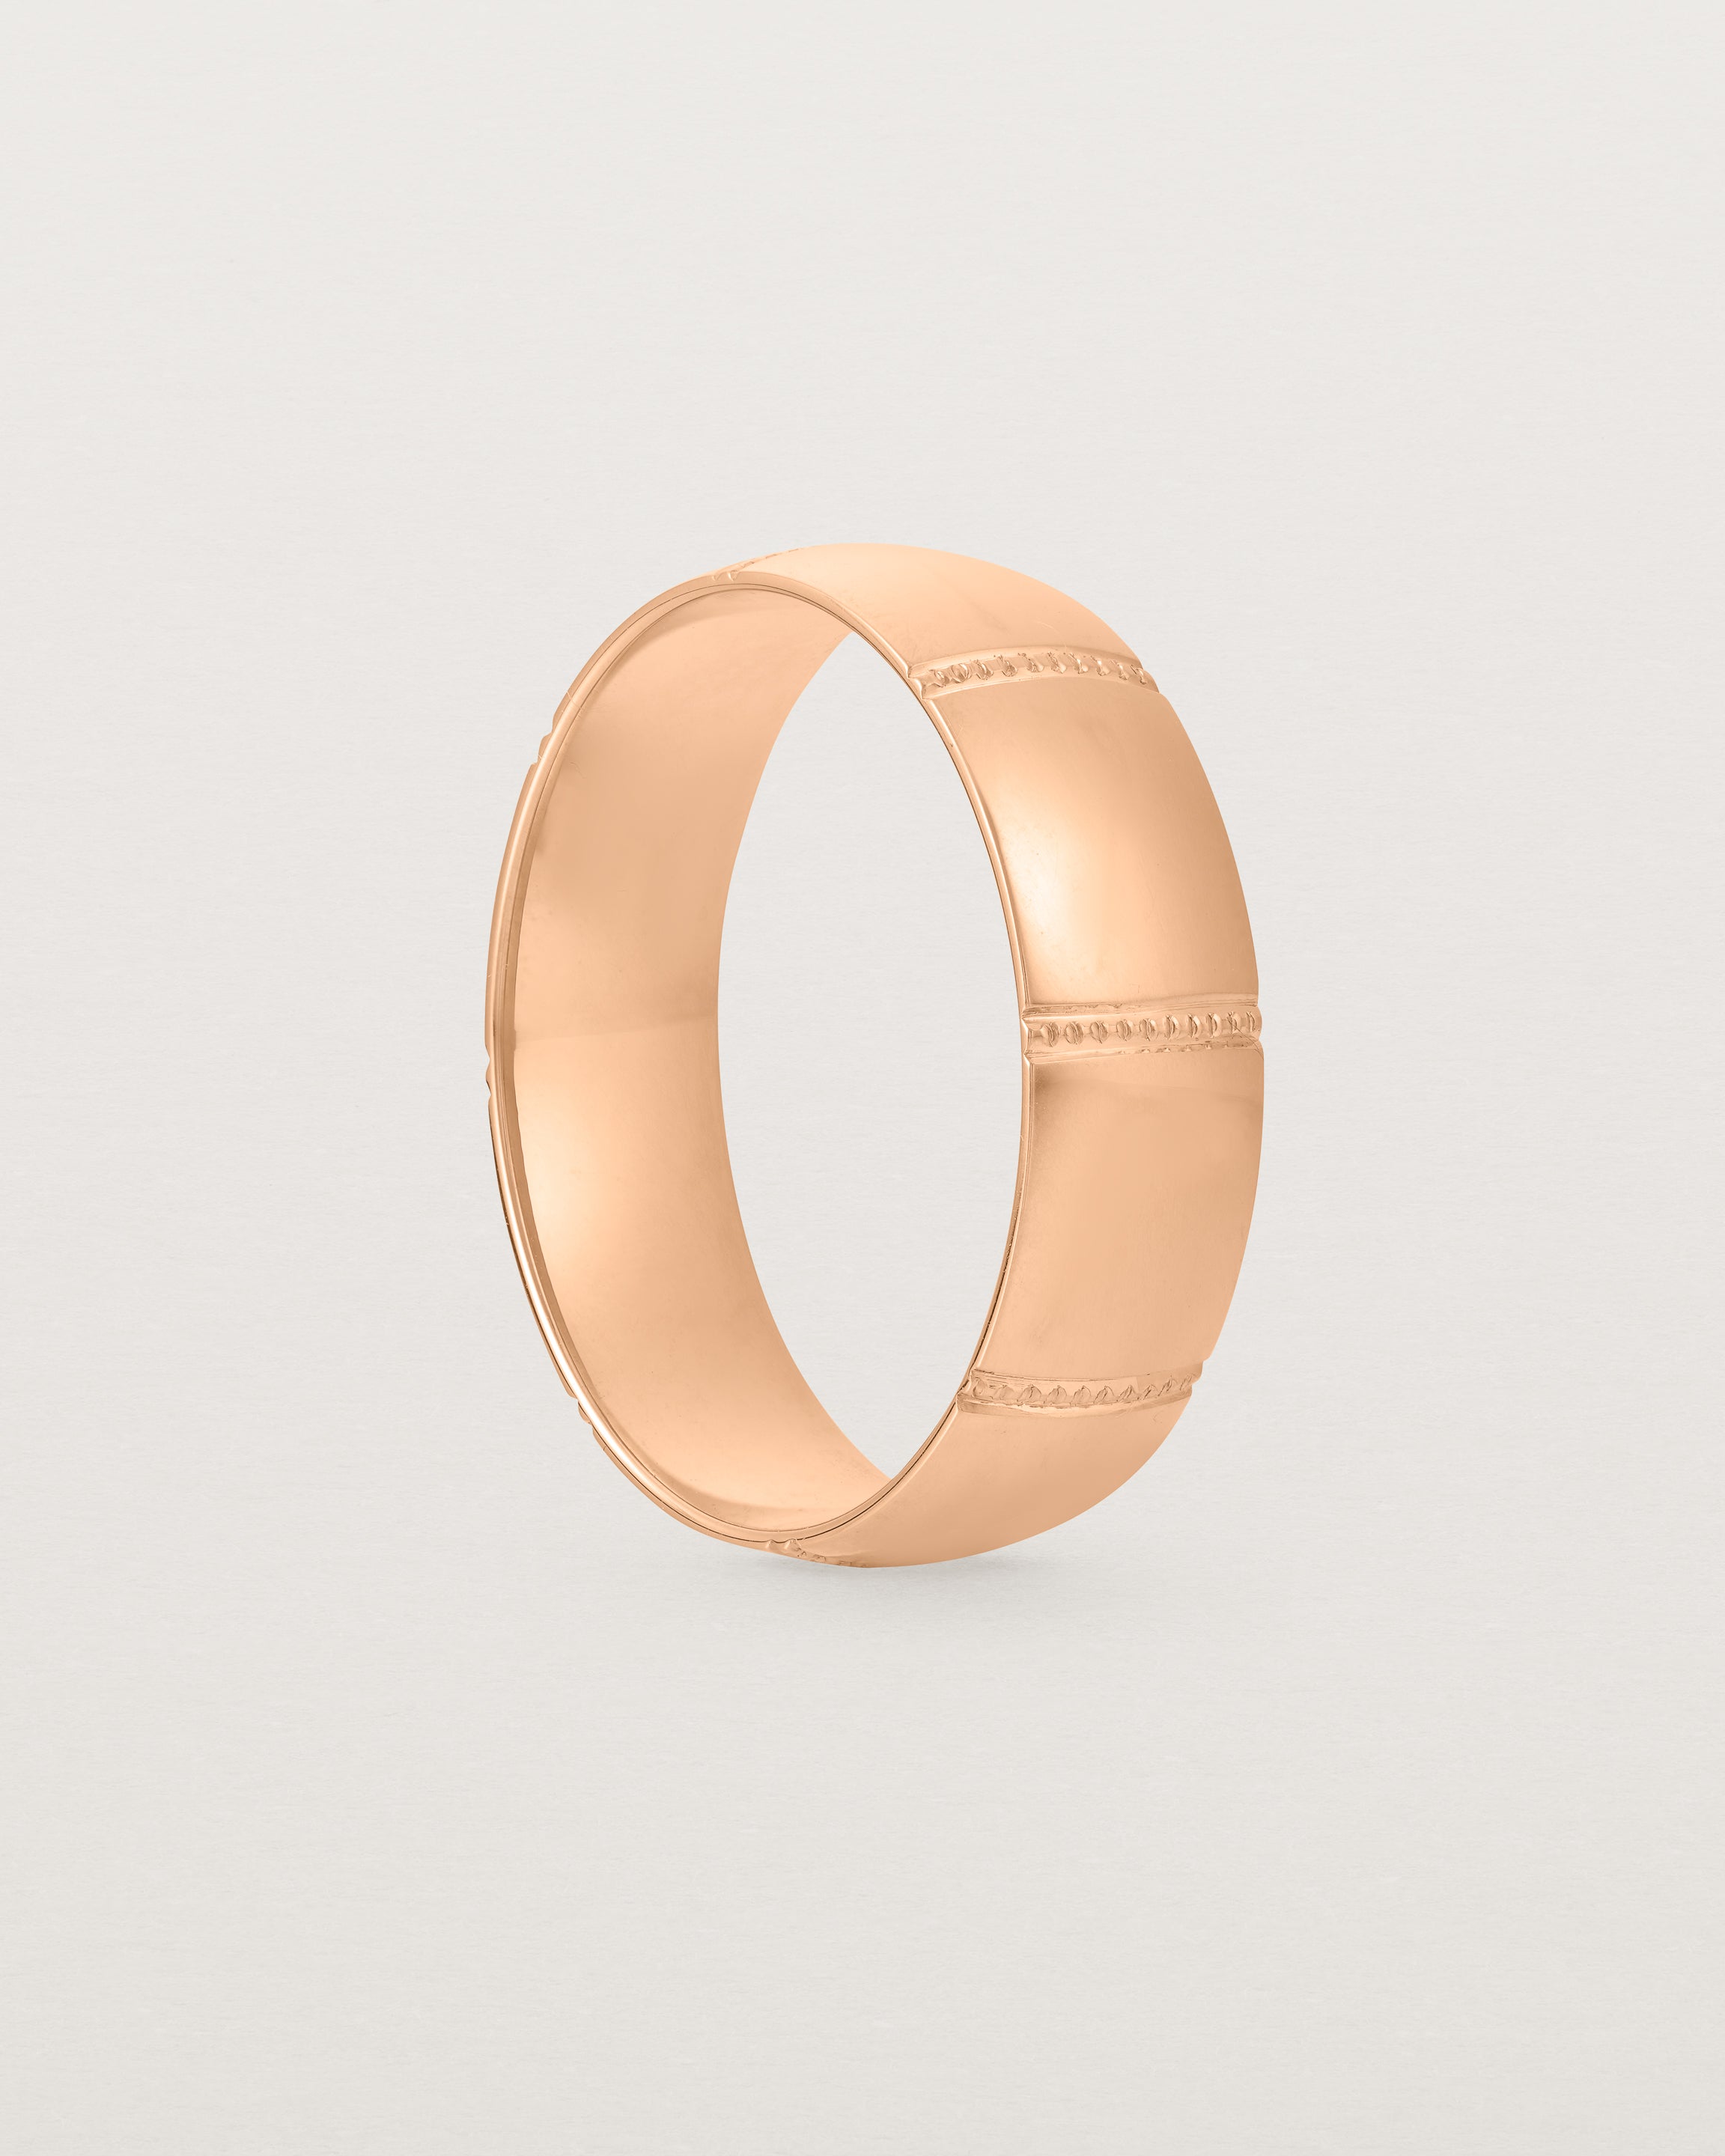 Standing view of the Grain Wedding Ring | 6mm | Rose Gold.